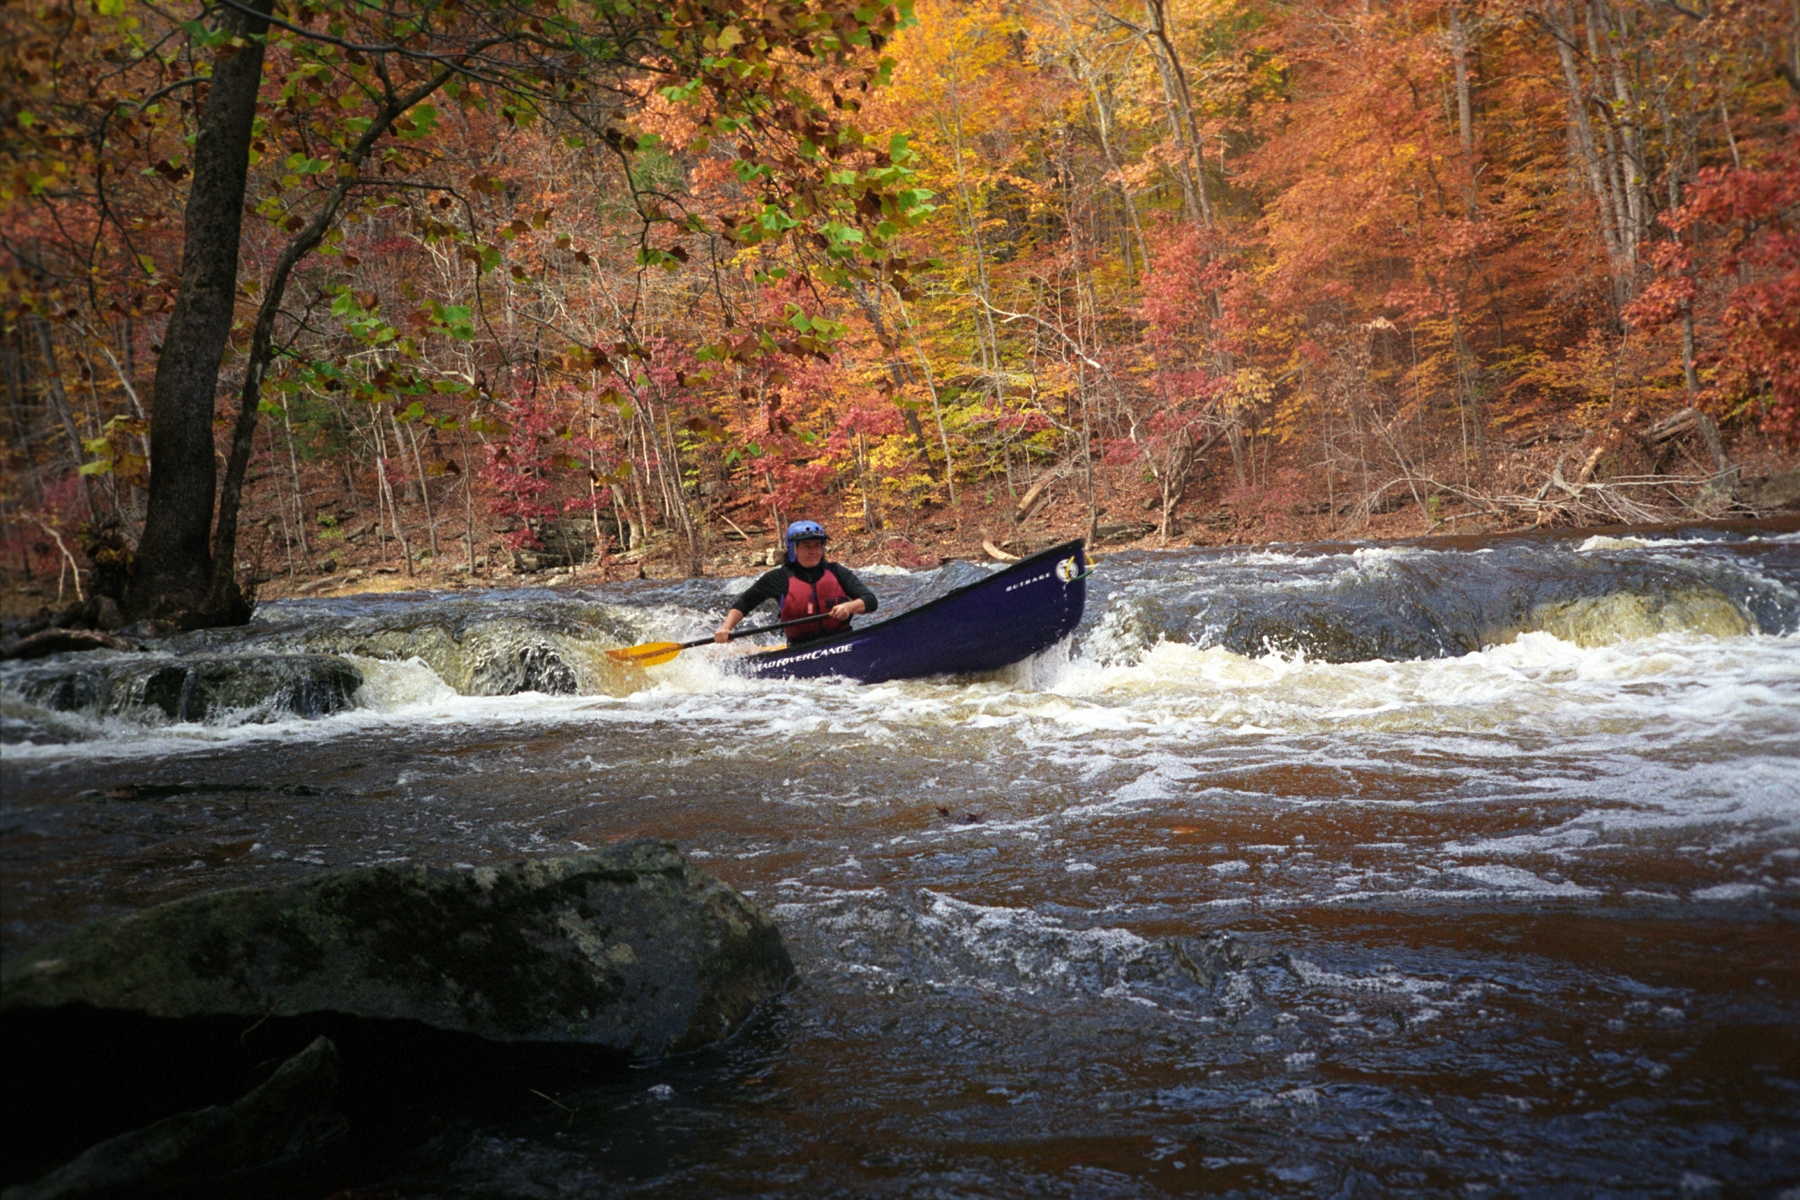 Angie Sigmund paddling the first ledge (Photo by Beth Koller - 11/5/05)